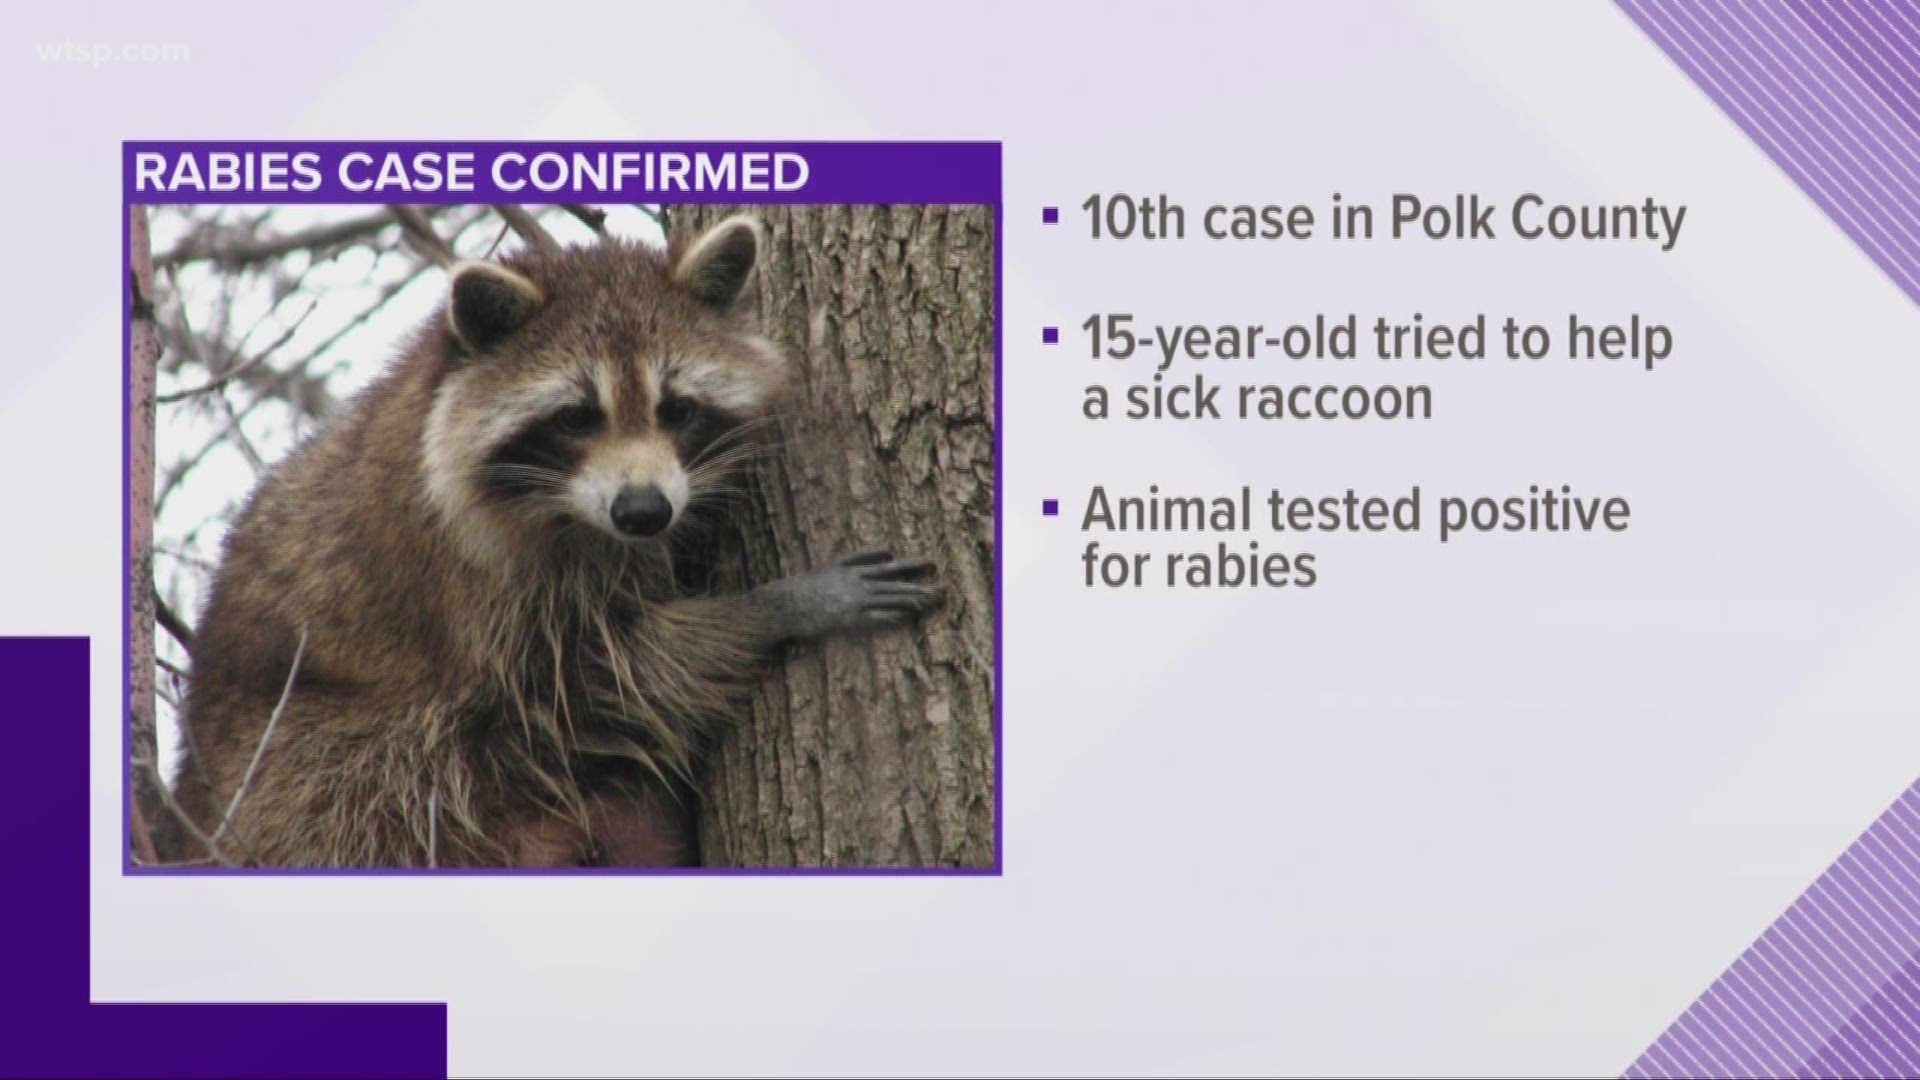 It's the tenth rabies case in Polk County this year